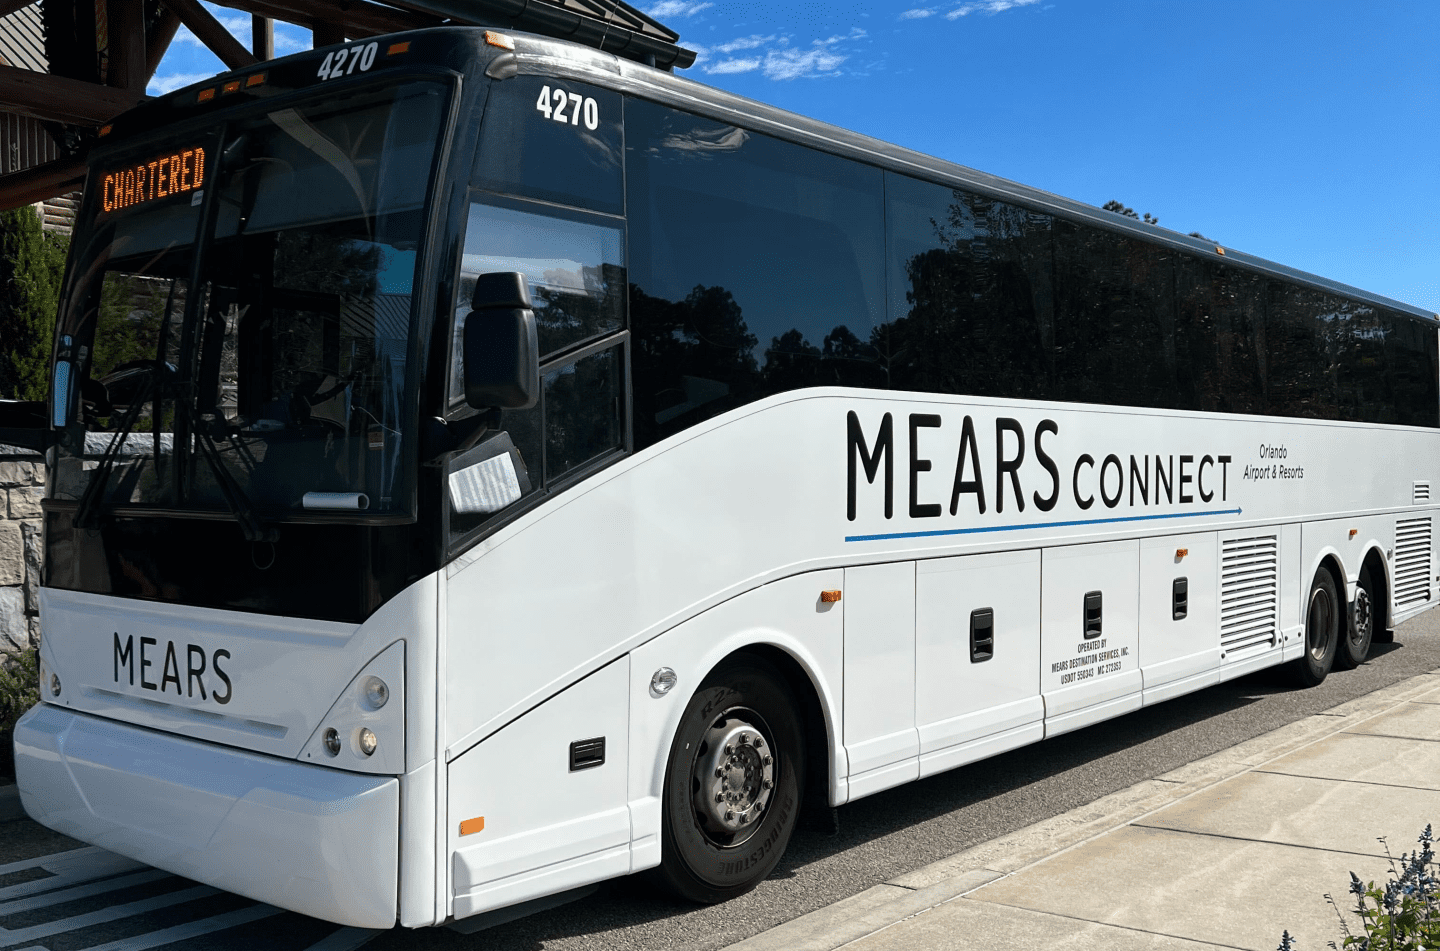 How Mears Connect Works at Disney World (including reservations & pricing)